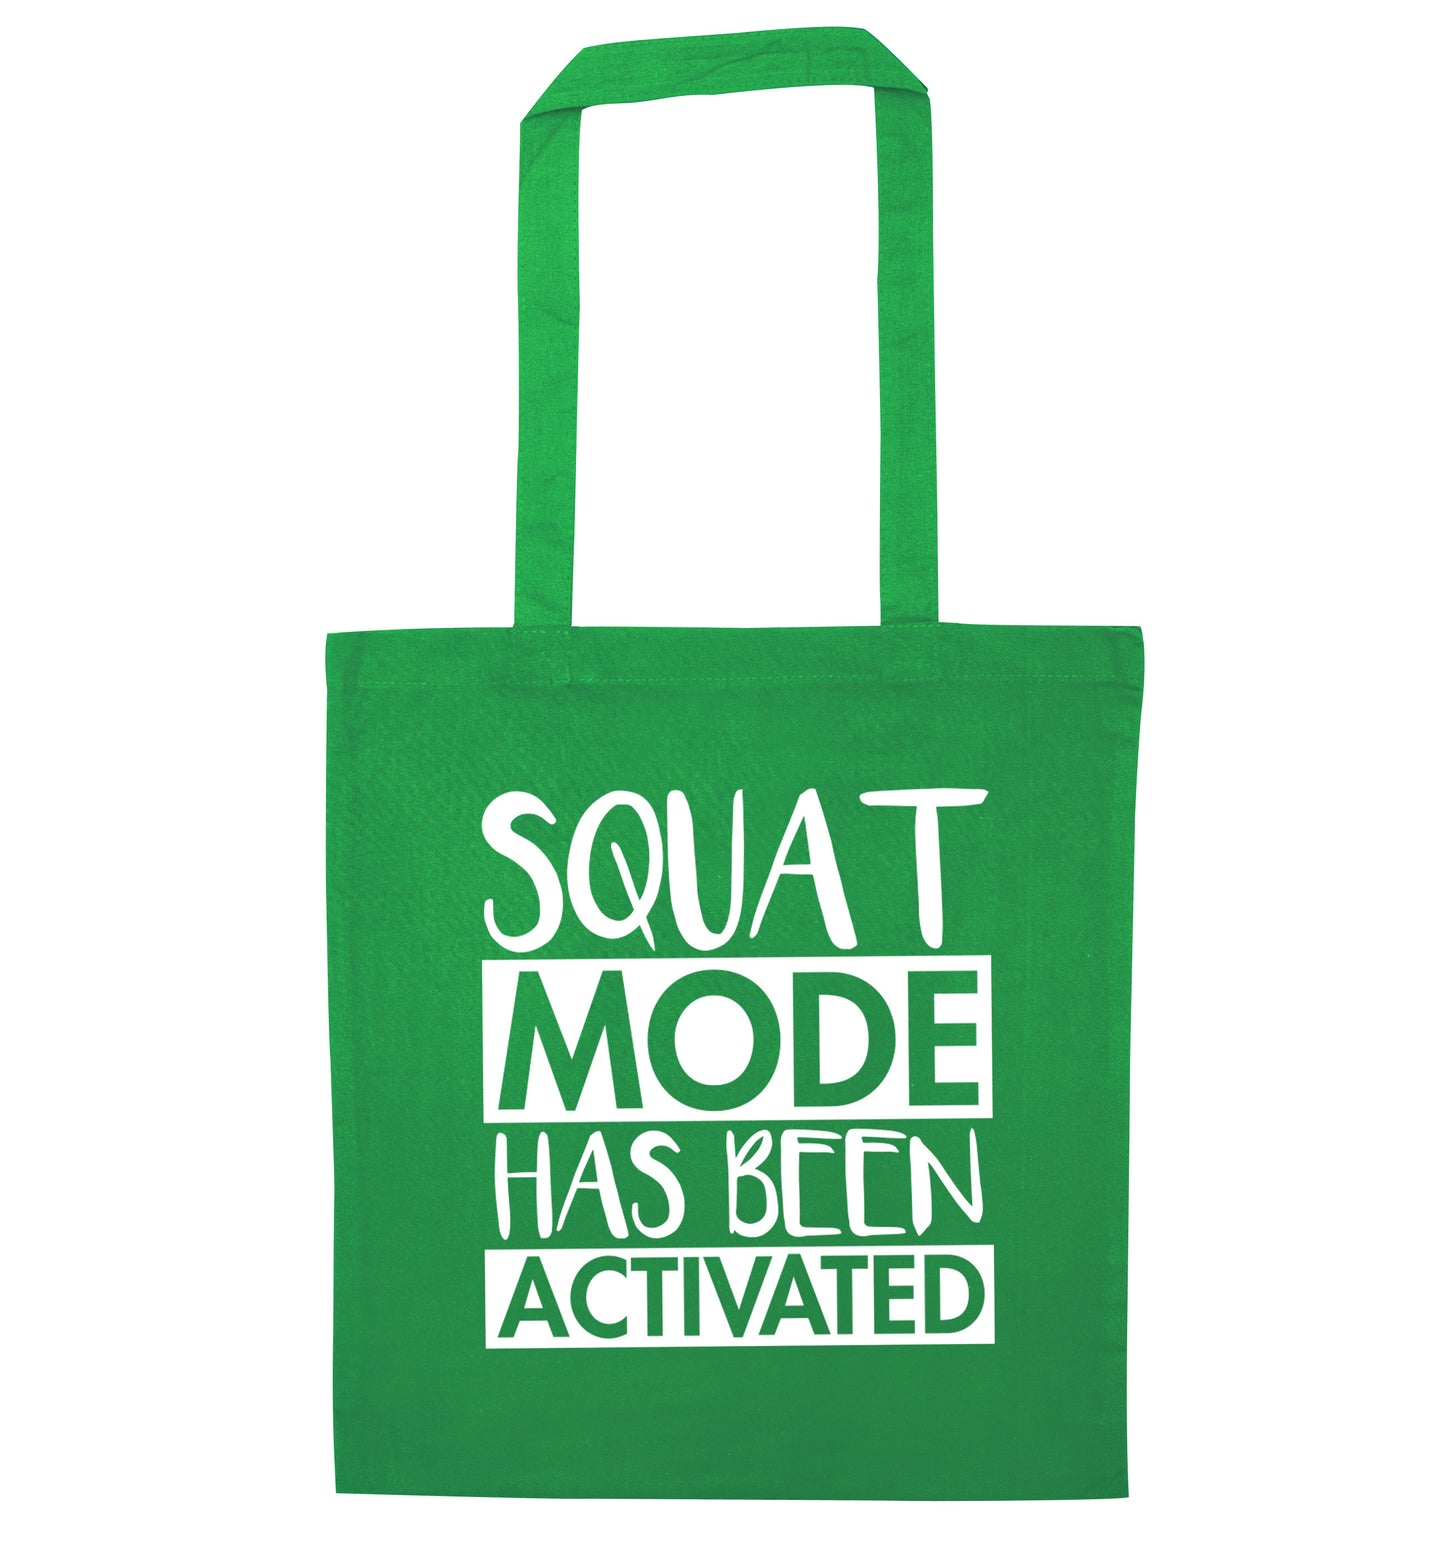 Squat mode activated green tote bag